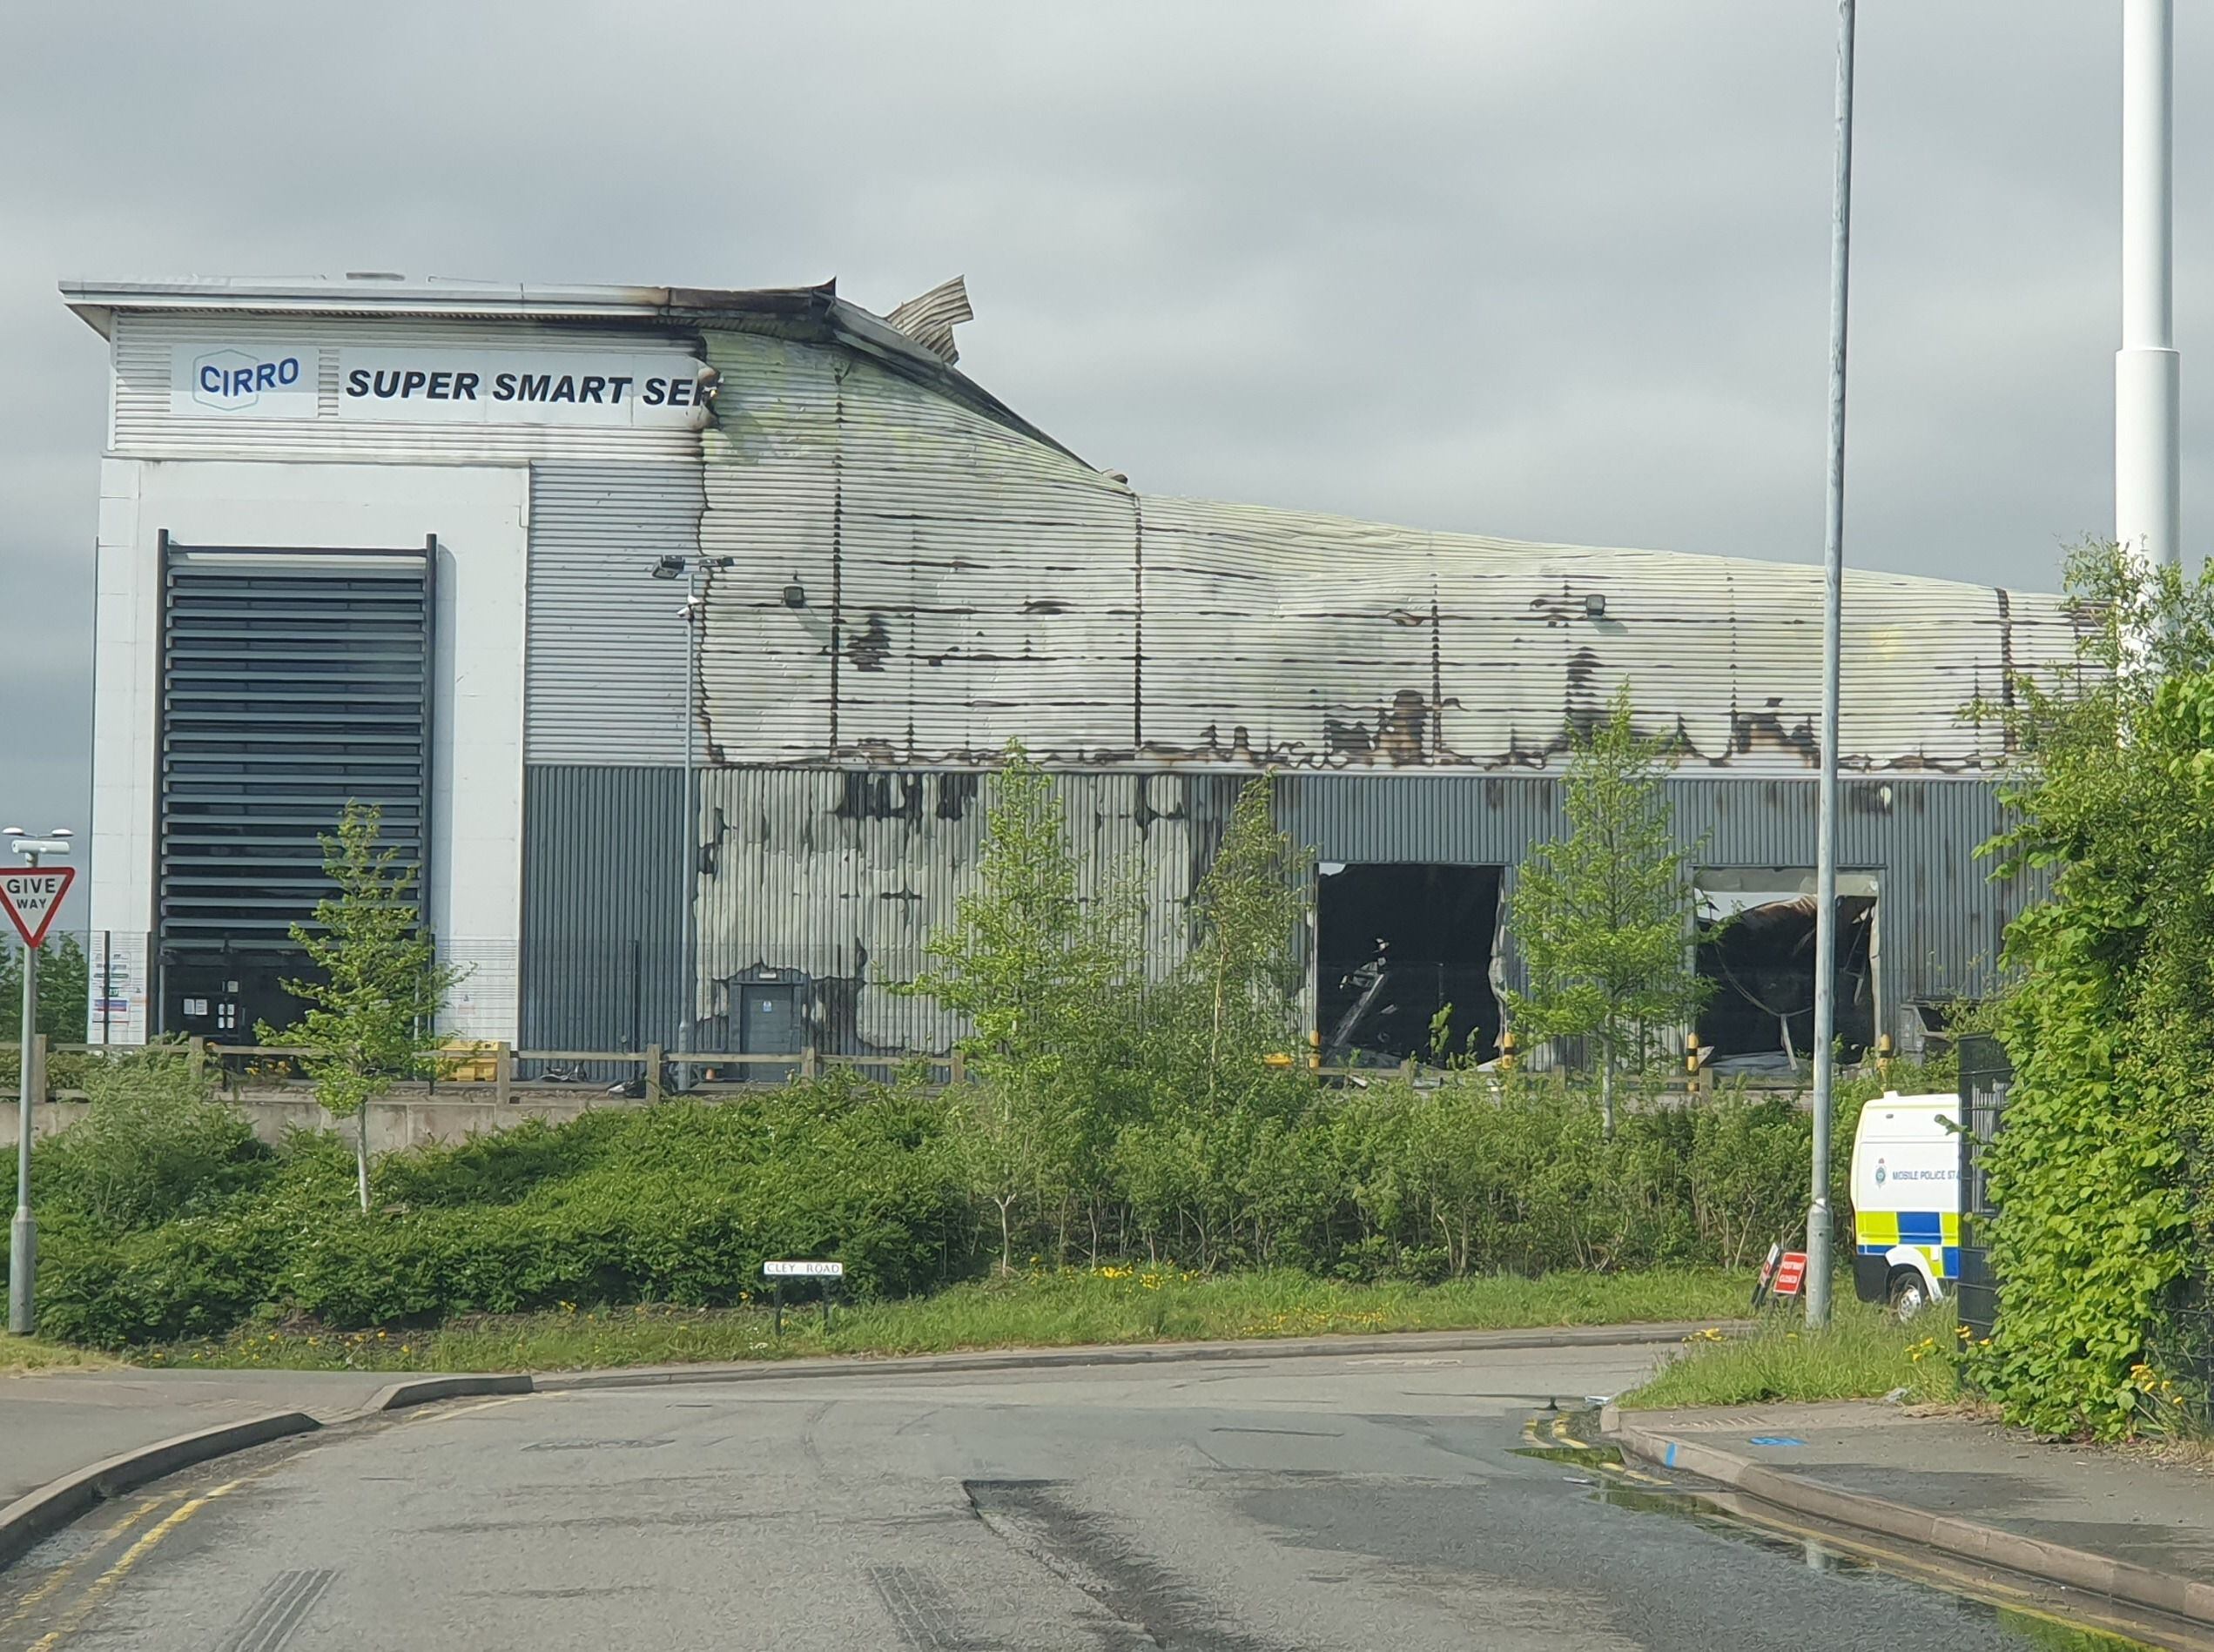 Latest scene at Cannock warehouse after fire crews spend weekend tackling blaze and aftermath